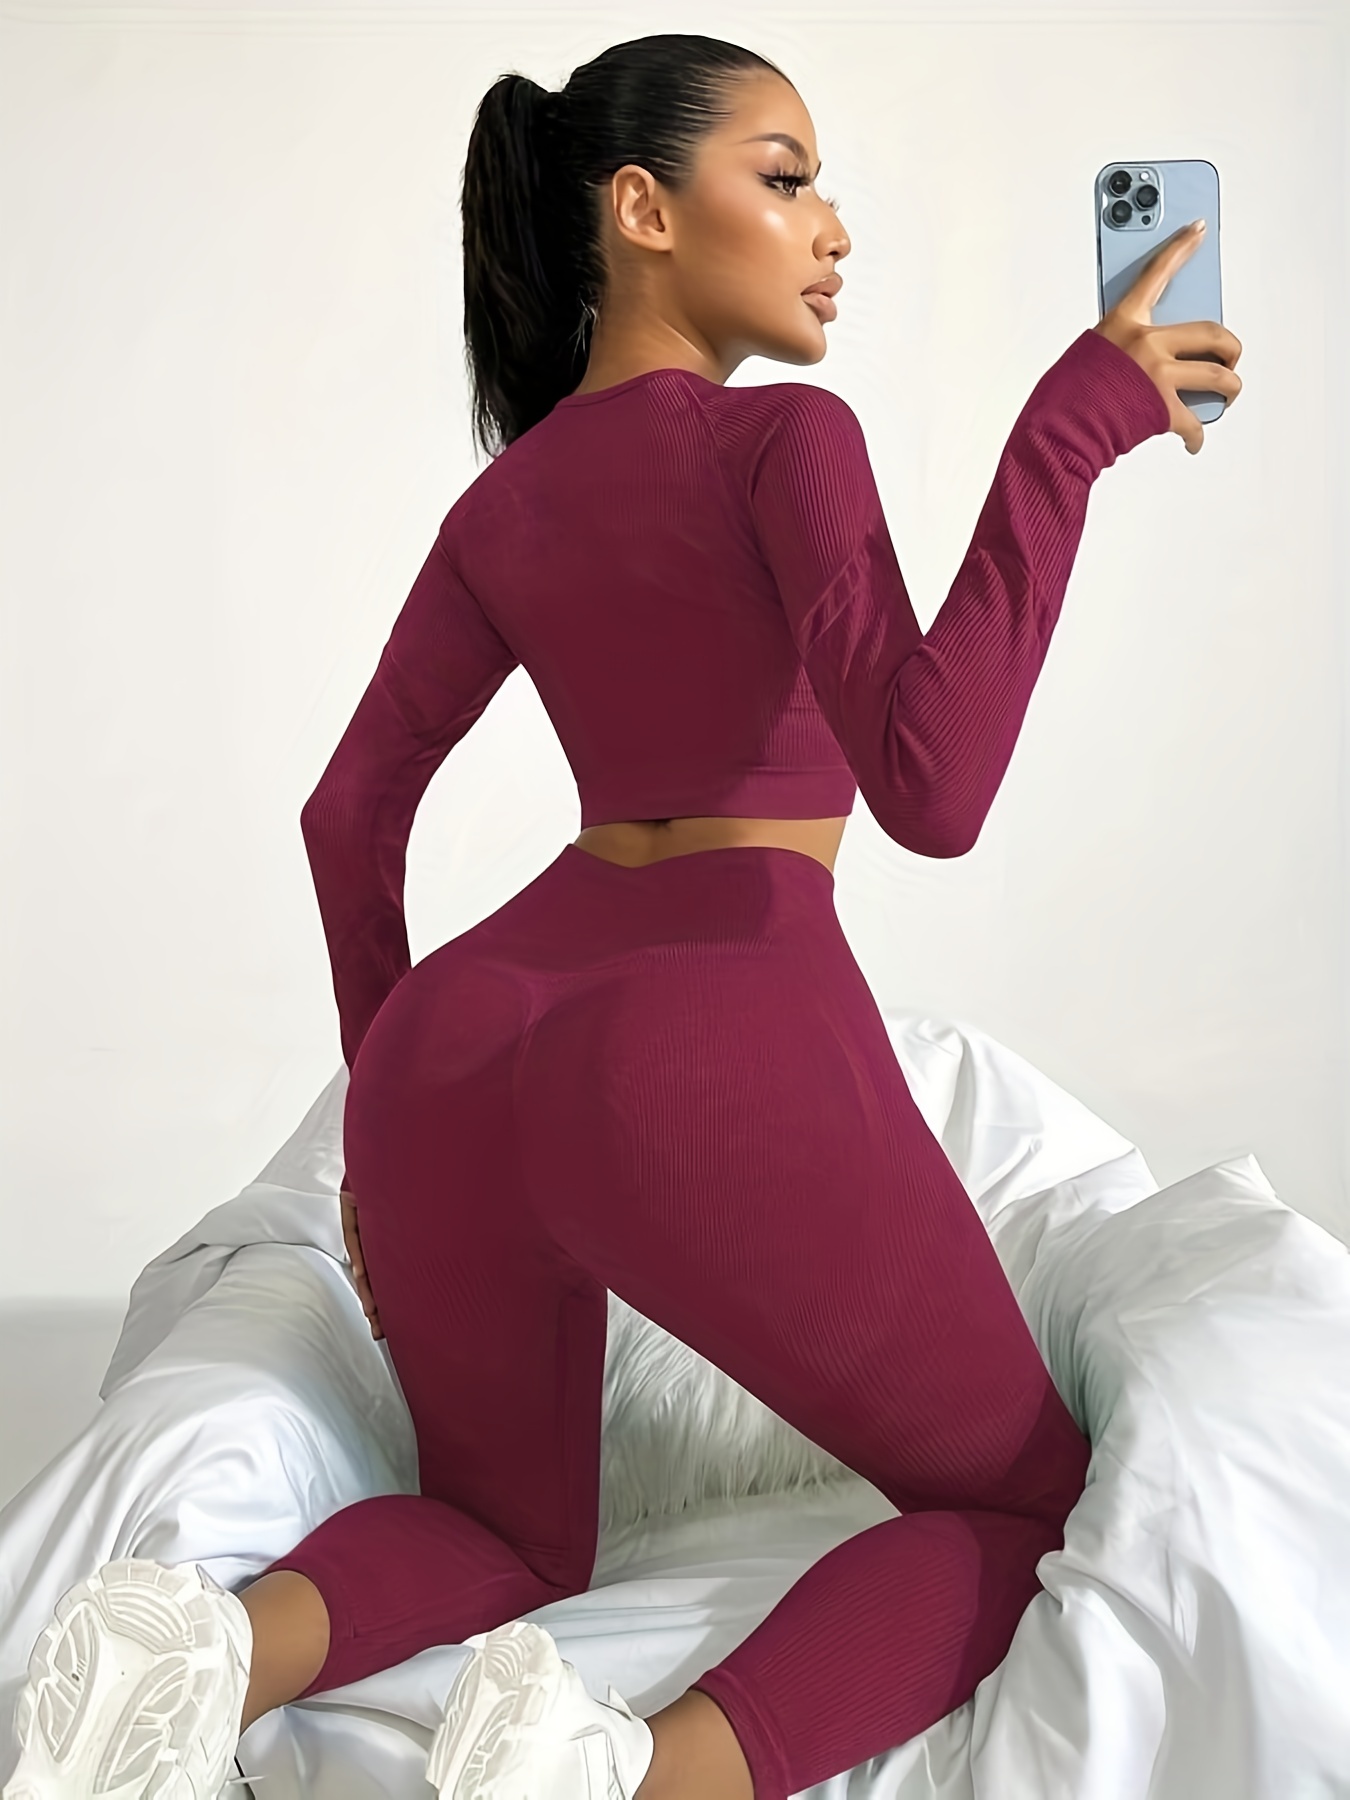 Seamless Ribbed High Waisted Leggings - Red